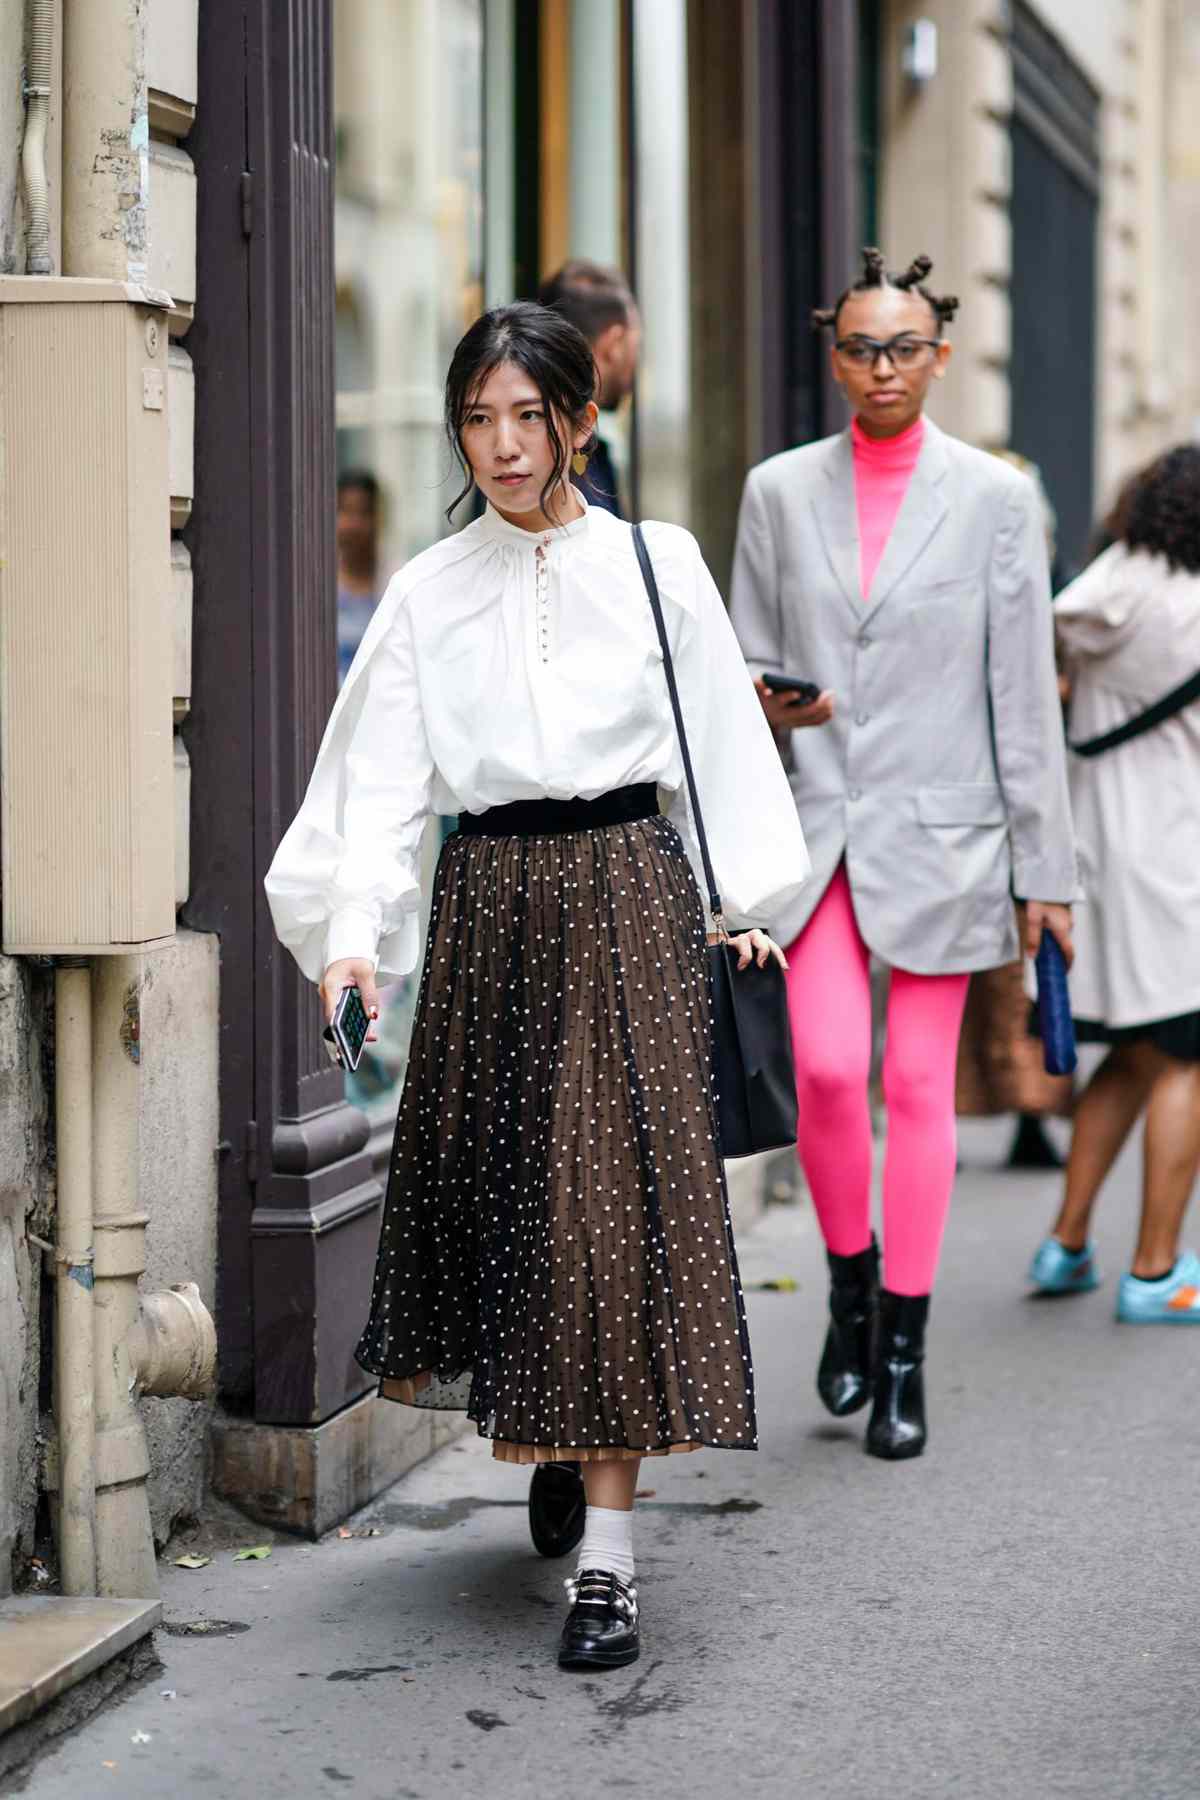 how to wear spring 2020 socks fashion trend, skirt and socks outfit idea